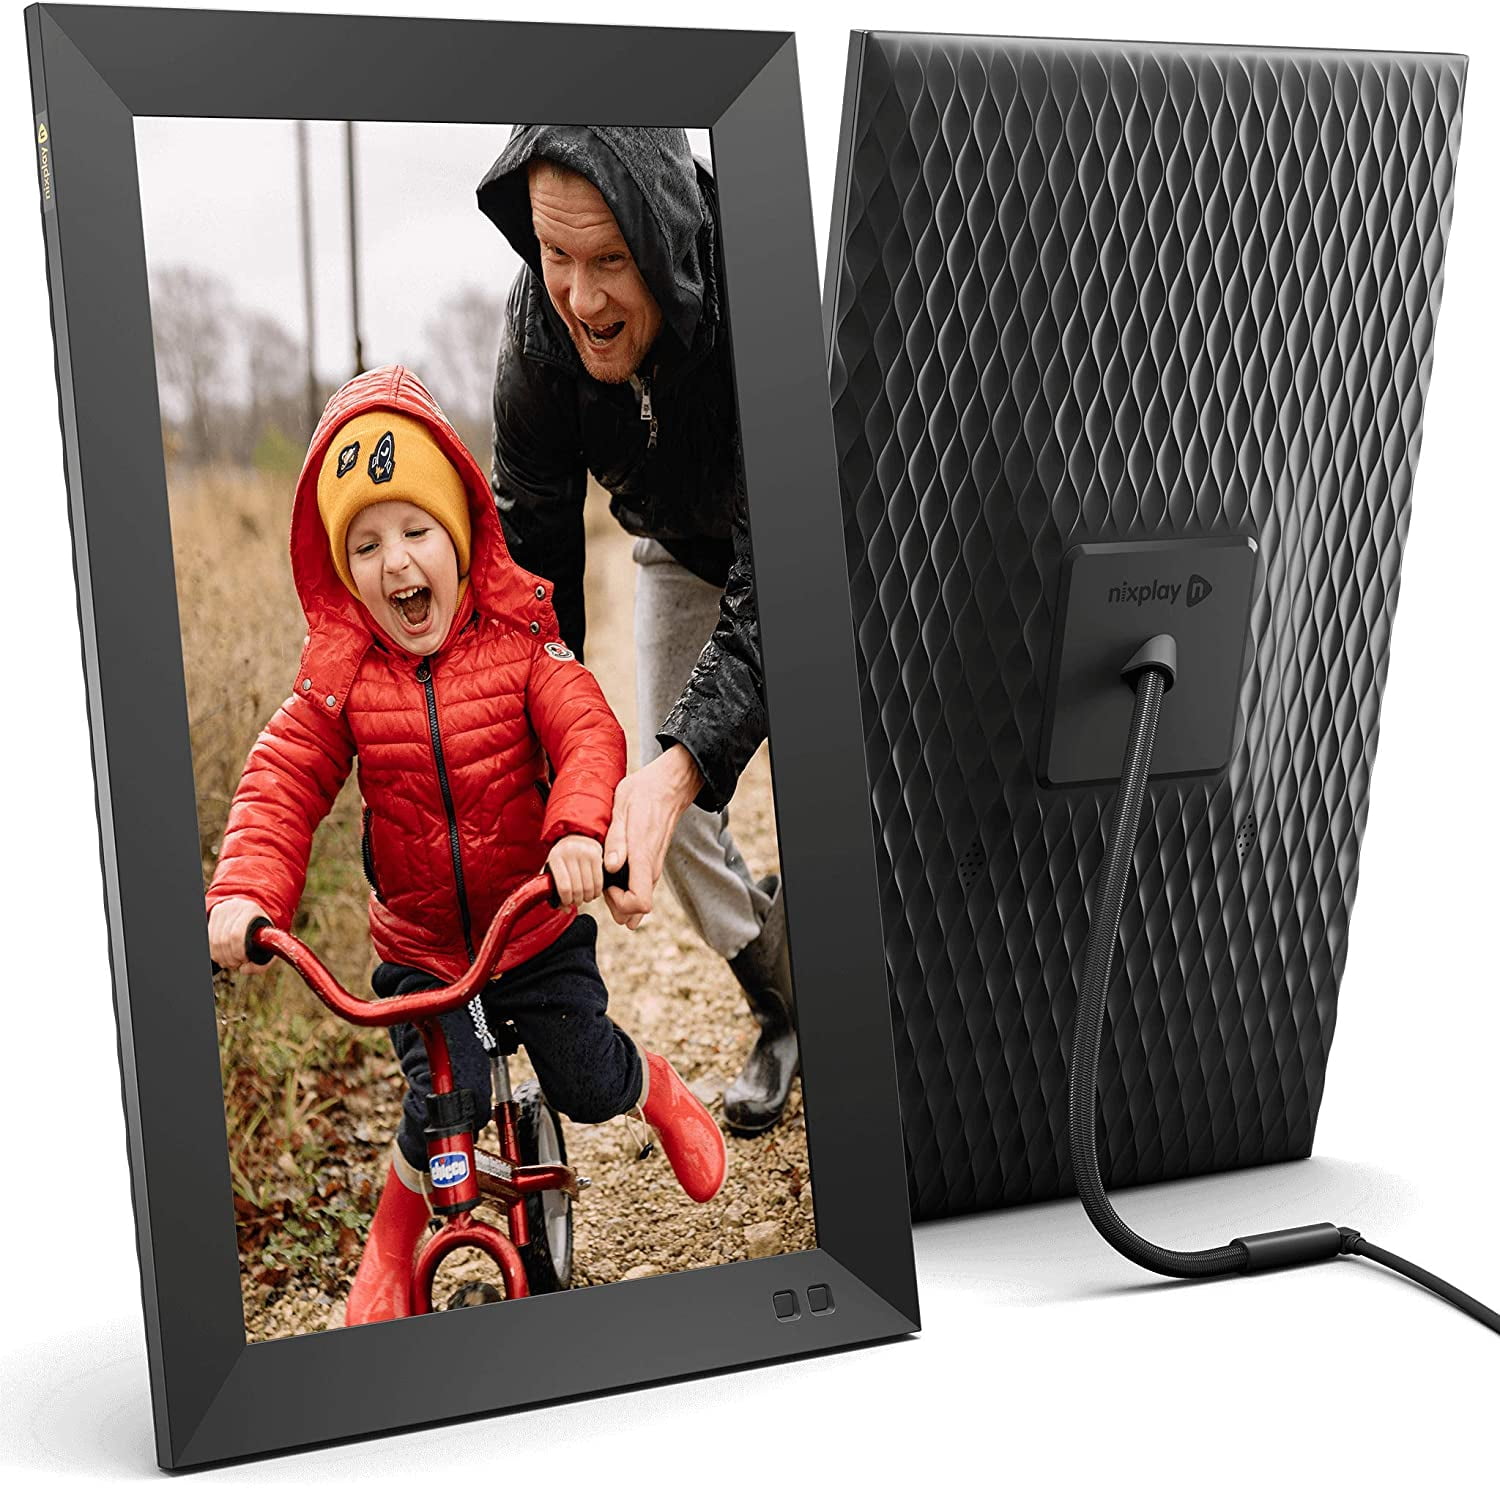 Leoie 15 inch Digital Picture Photo Frame 1280x800 HD Resolution 16:9 Wide Picture Screen Clear and Distinct Display Black US Plug